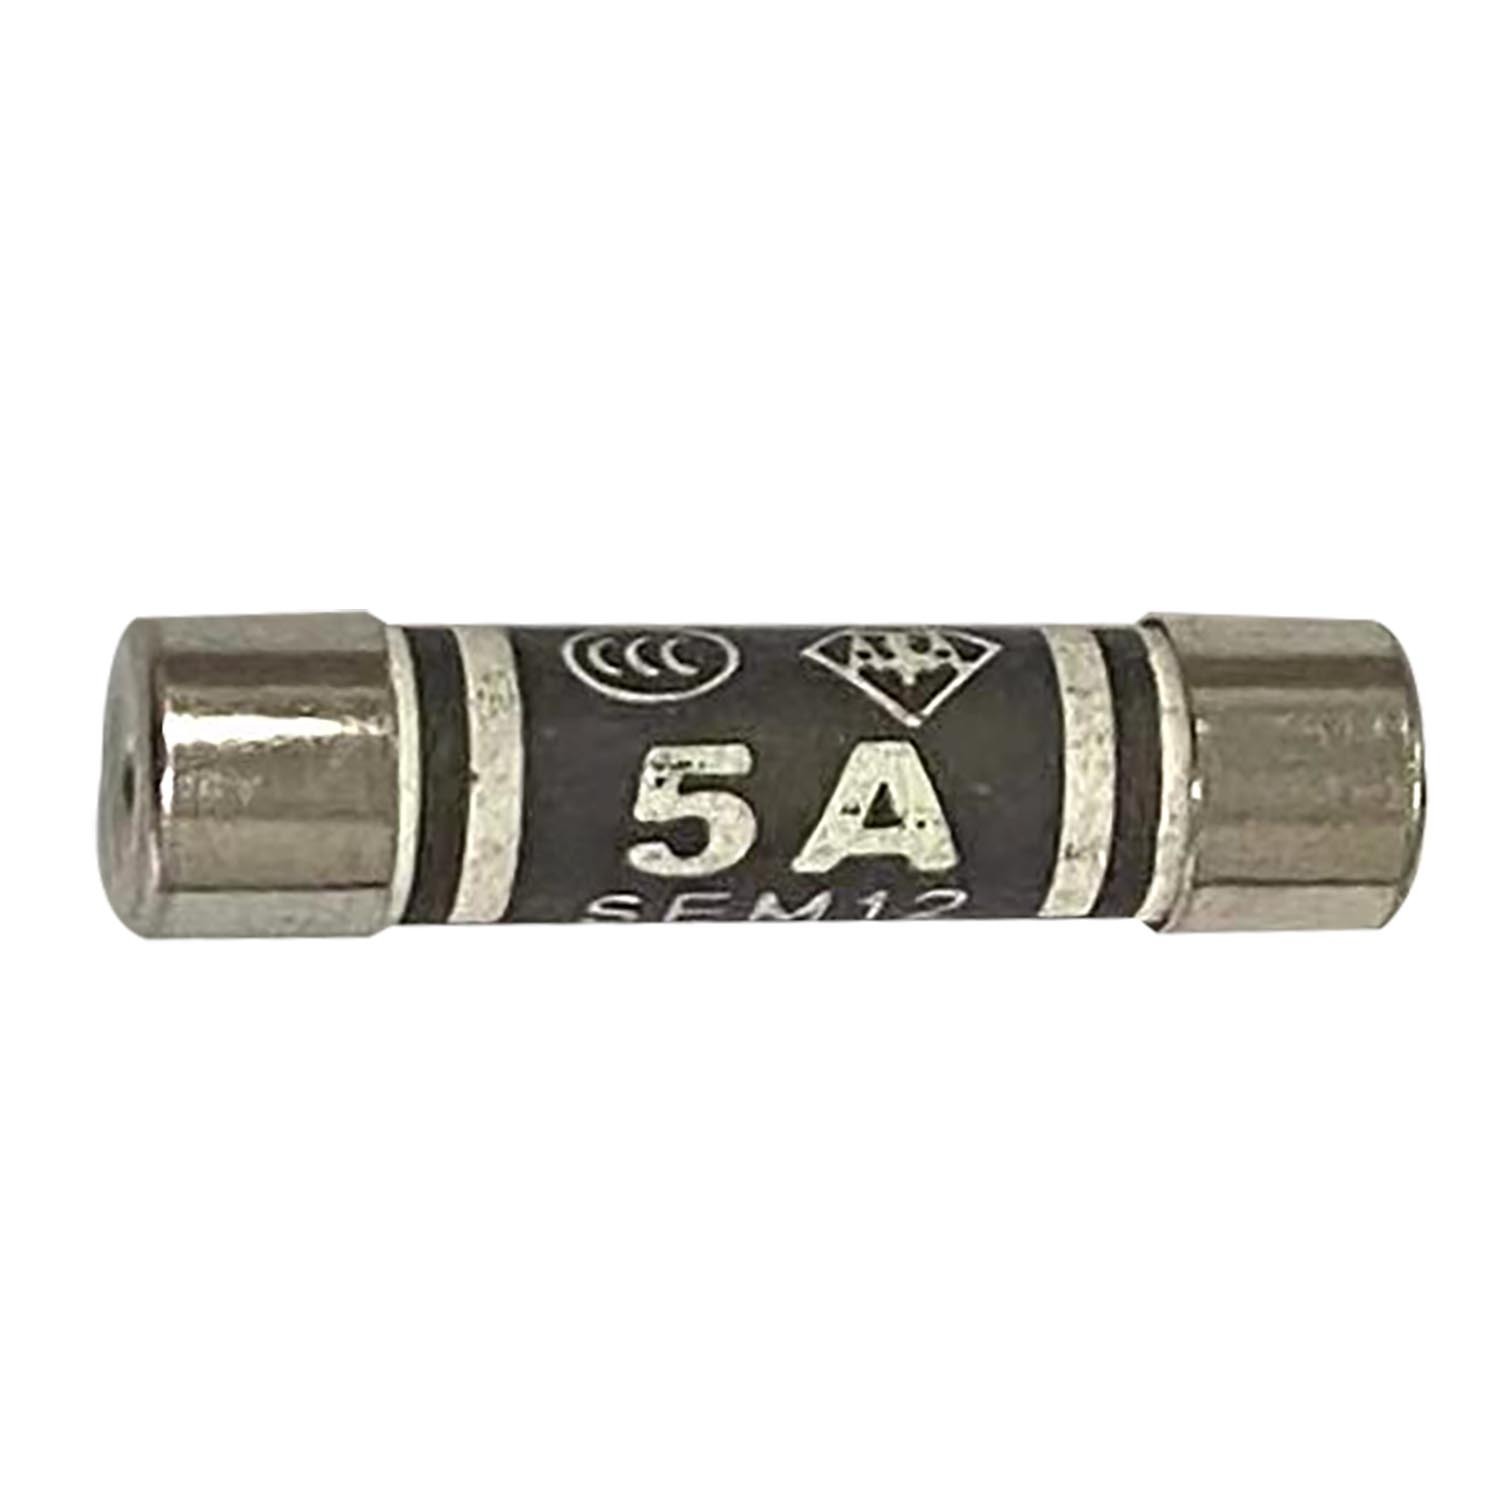 5 Amp Fuses 3 Pack Image